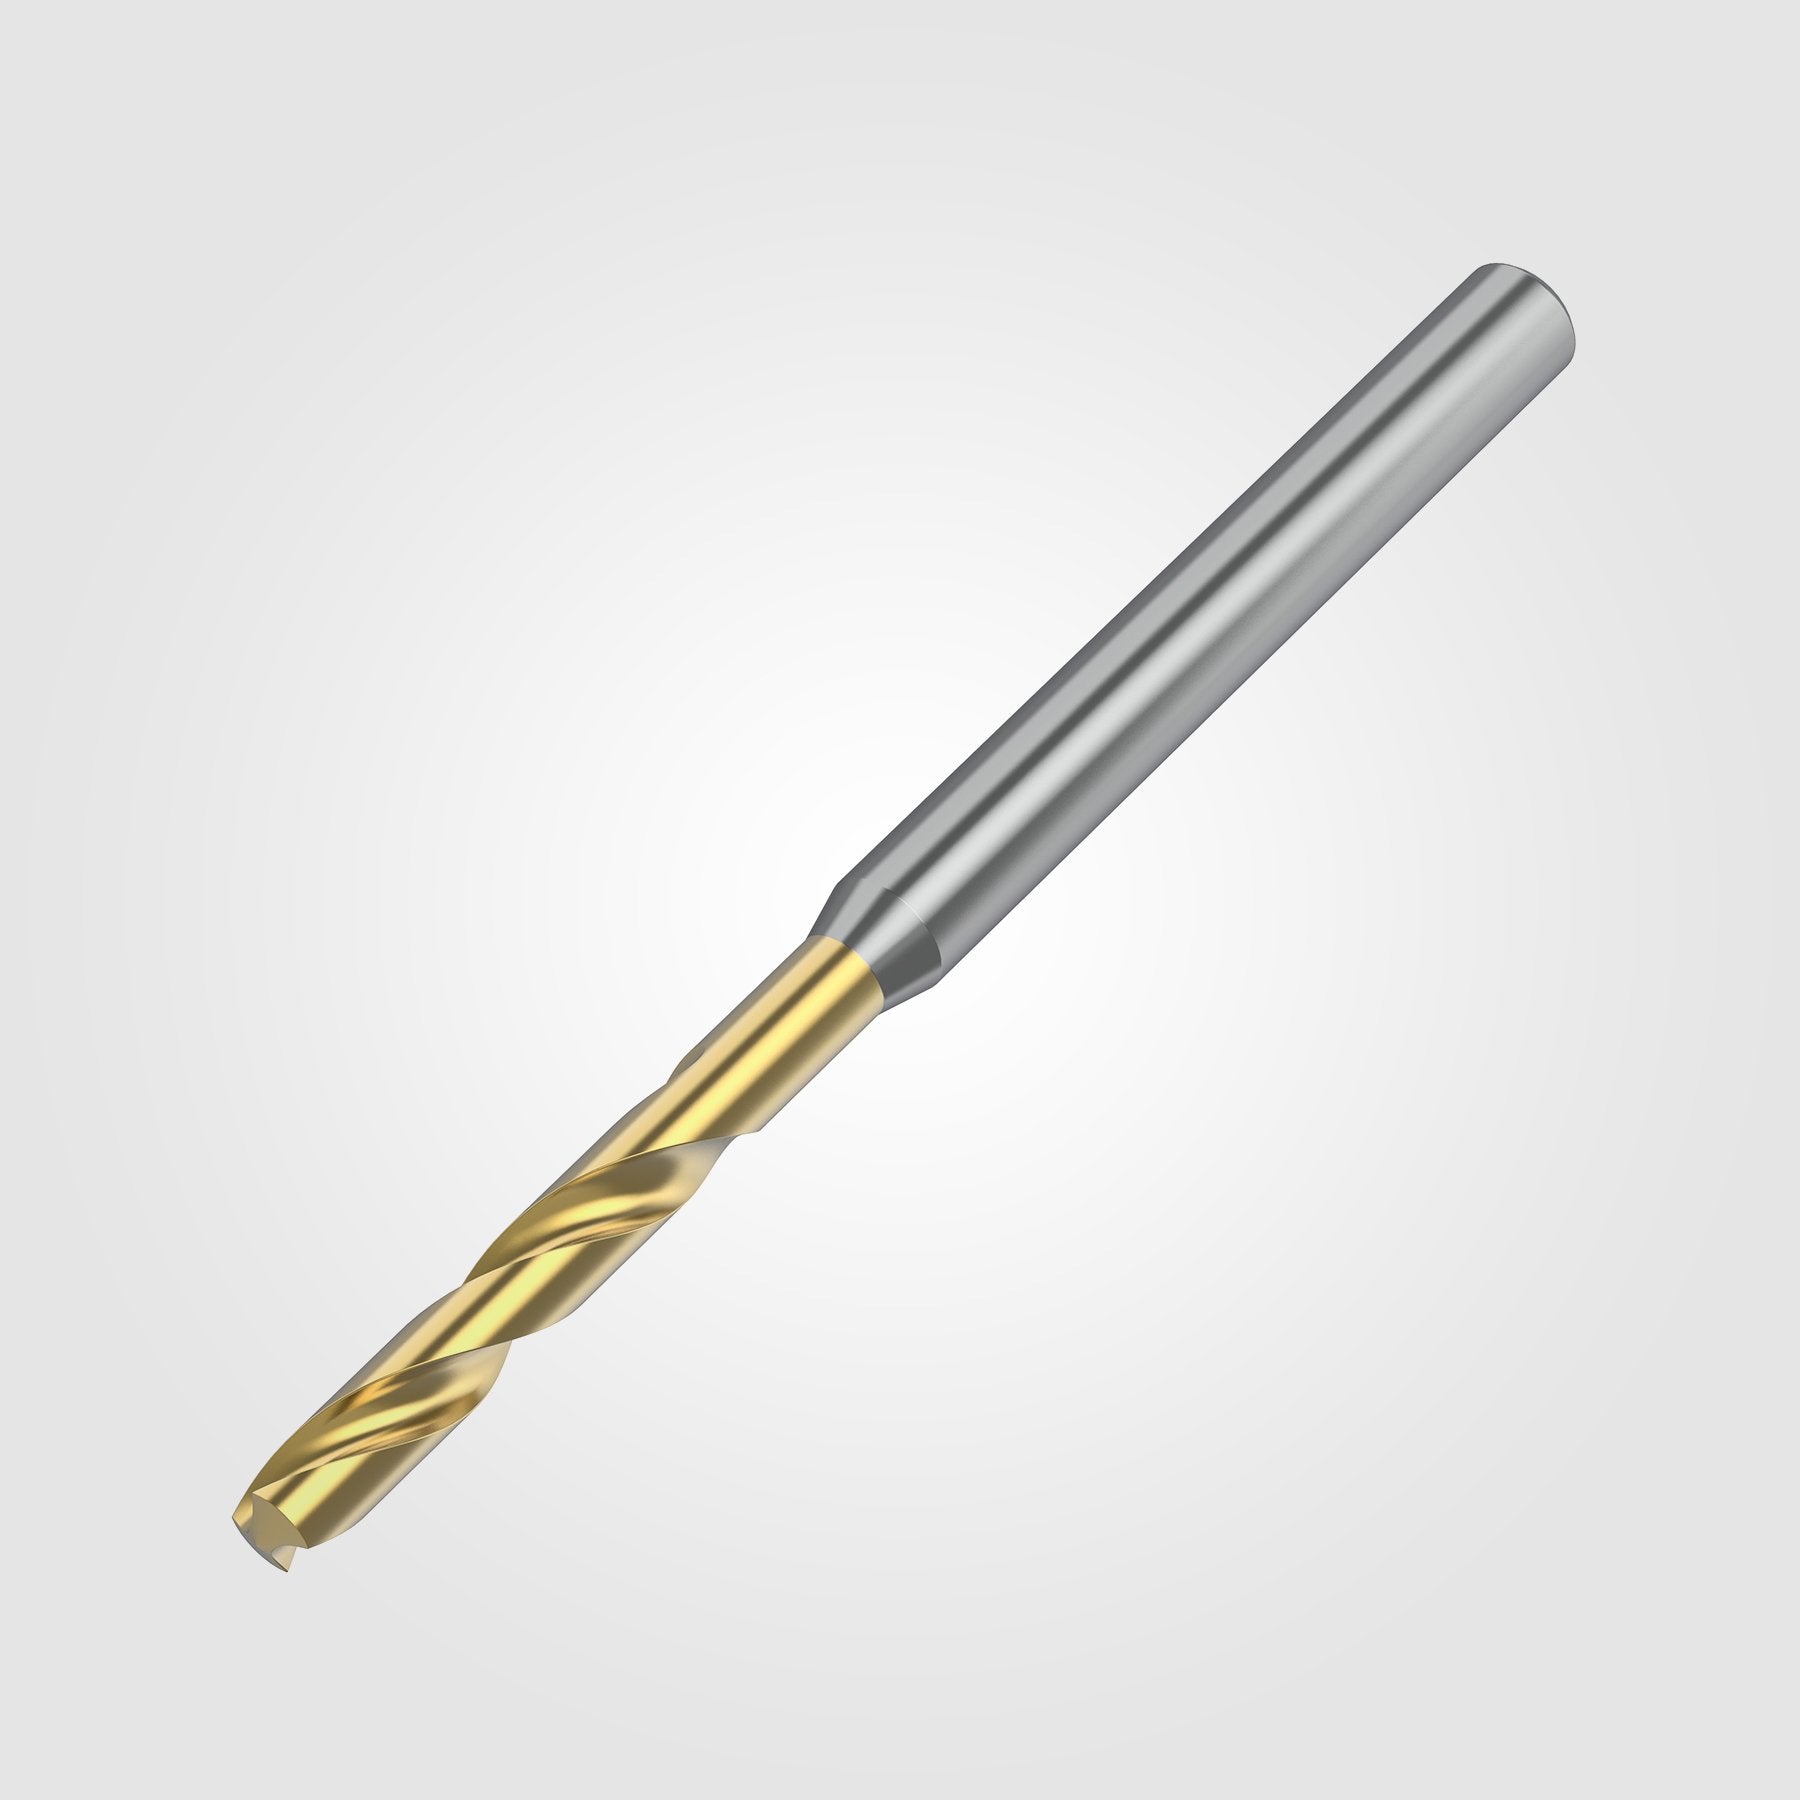 GOdrill (THROUGH COOLANT) | 16.1mm / .6339" / 3xD | SOLID CARBIDE DRILL | 4151277